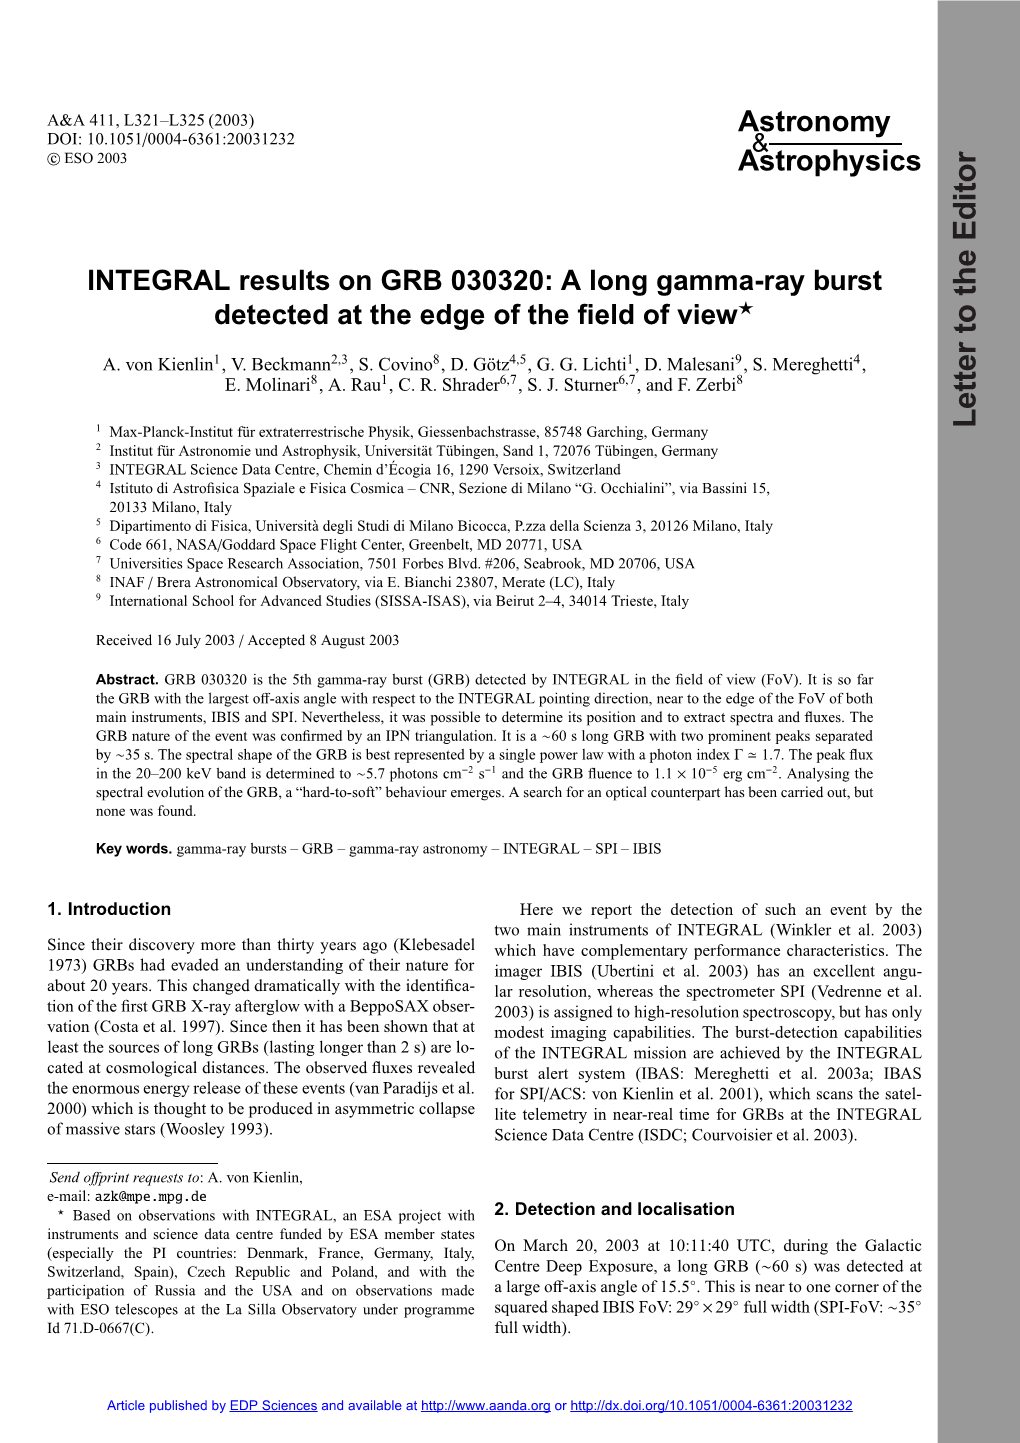 INTEGRAL Results on GRB 030320: a Long Gamma-Ray Burst Detected at the Edge of the ﬁeld of View?